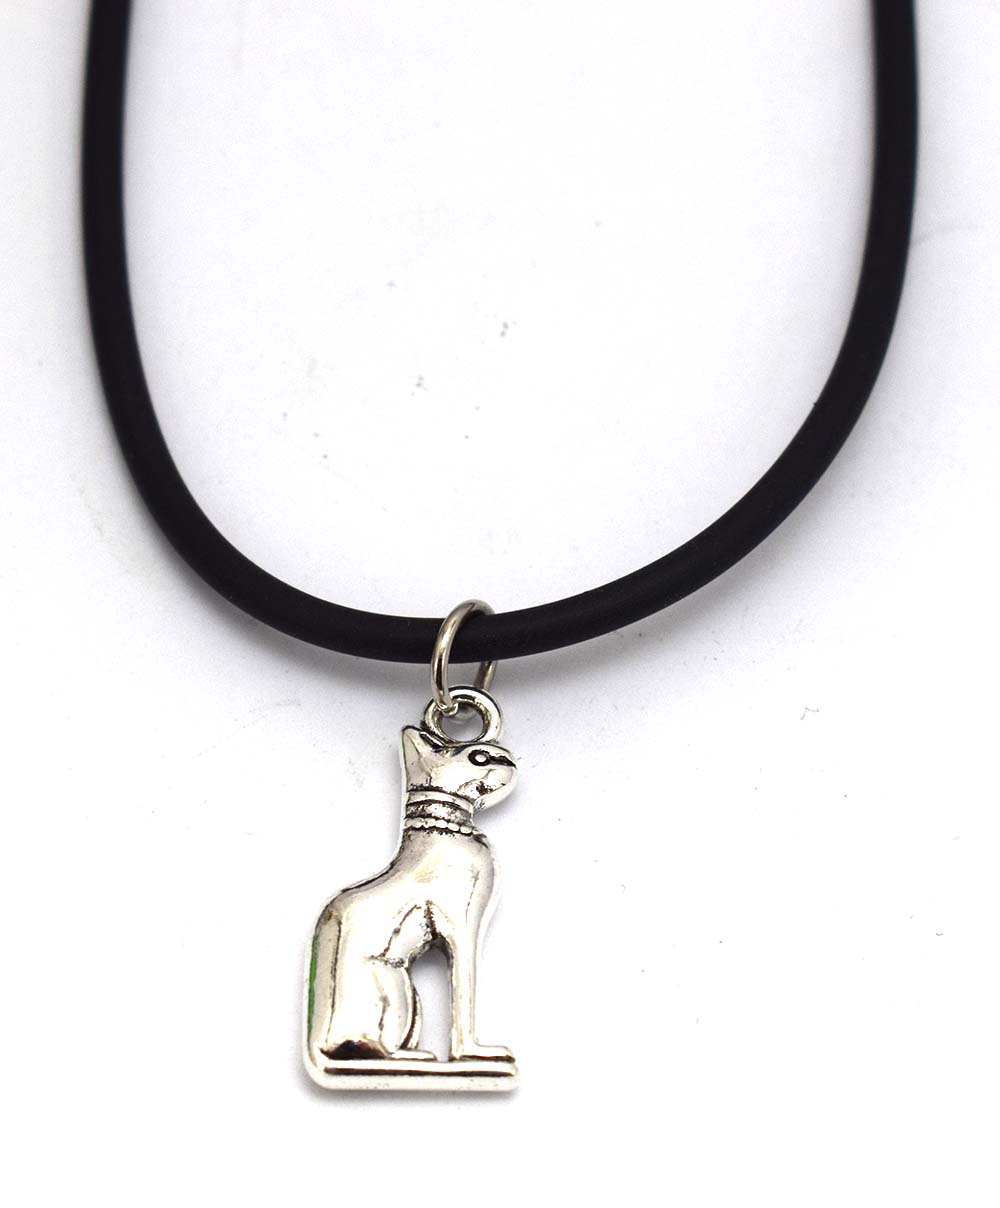 immatgar pharaonic Egyptian bastet cat necklace jewellery Egyptian souvenirs gifts for Women Girls. ( Silver )